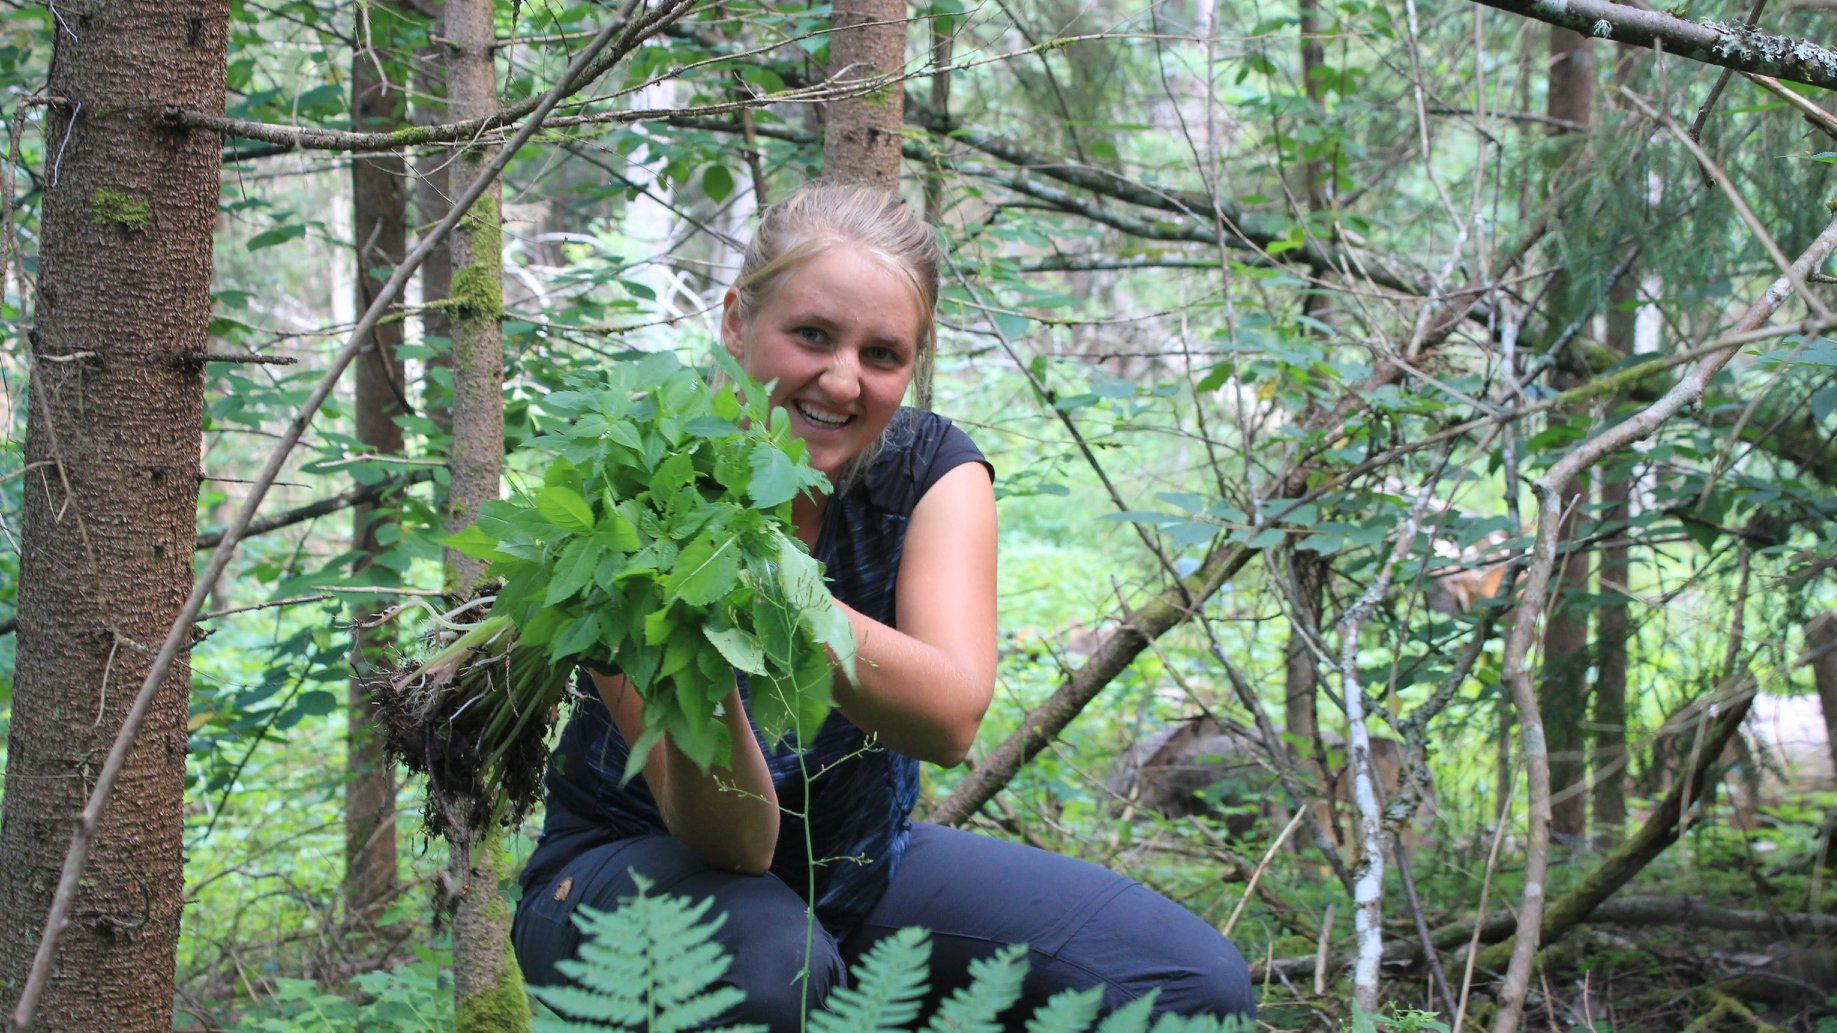 Female conservation volunteer at work in a forest in Estonia